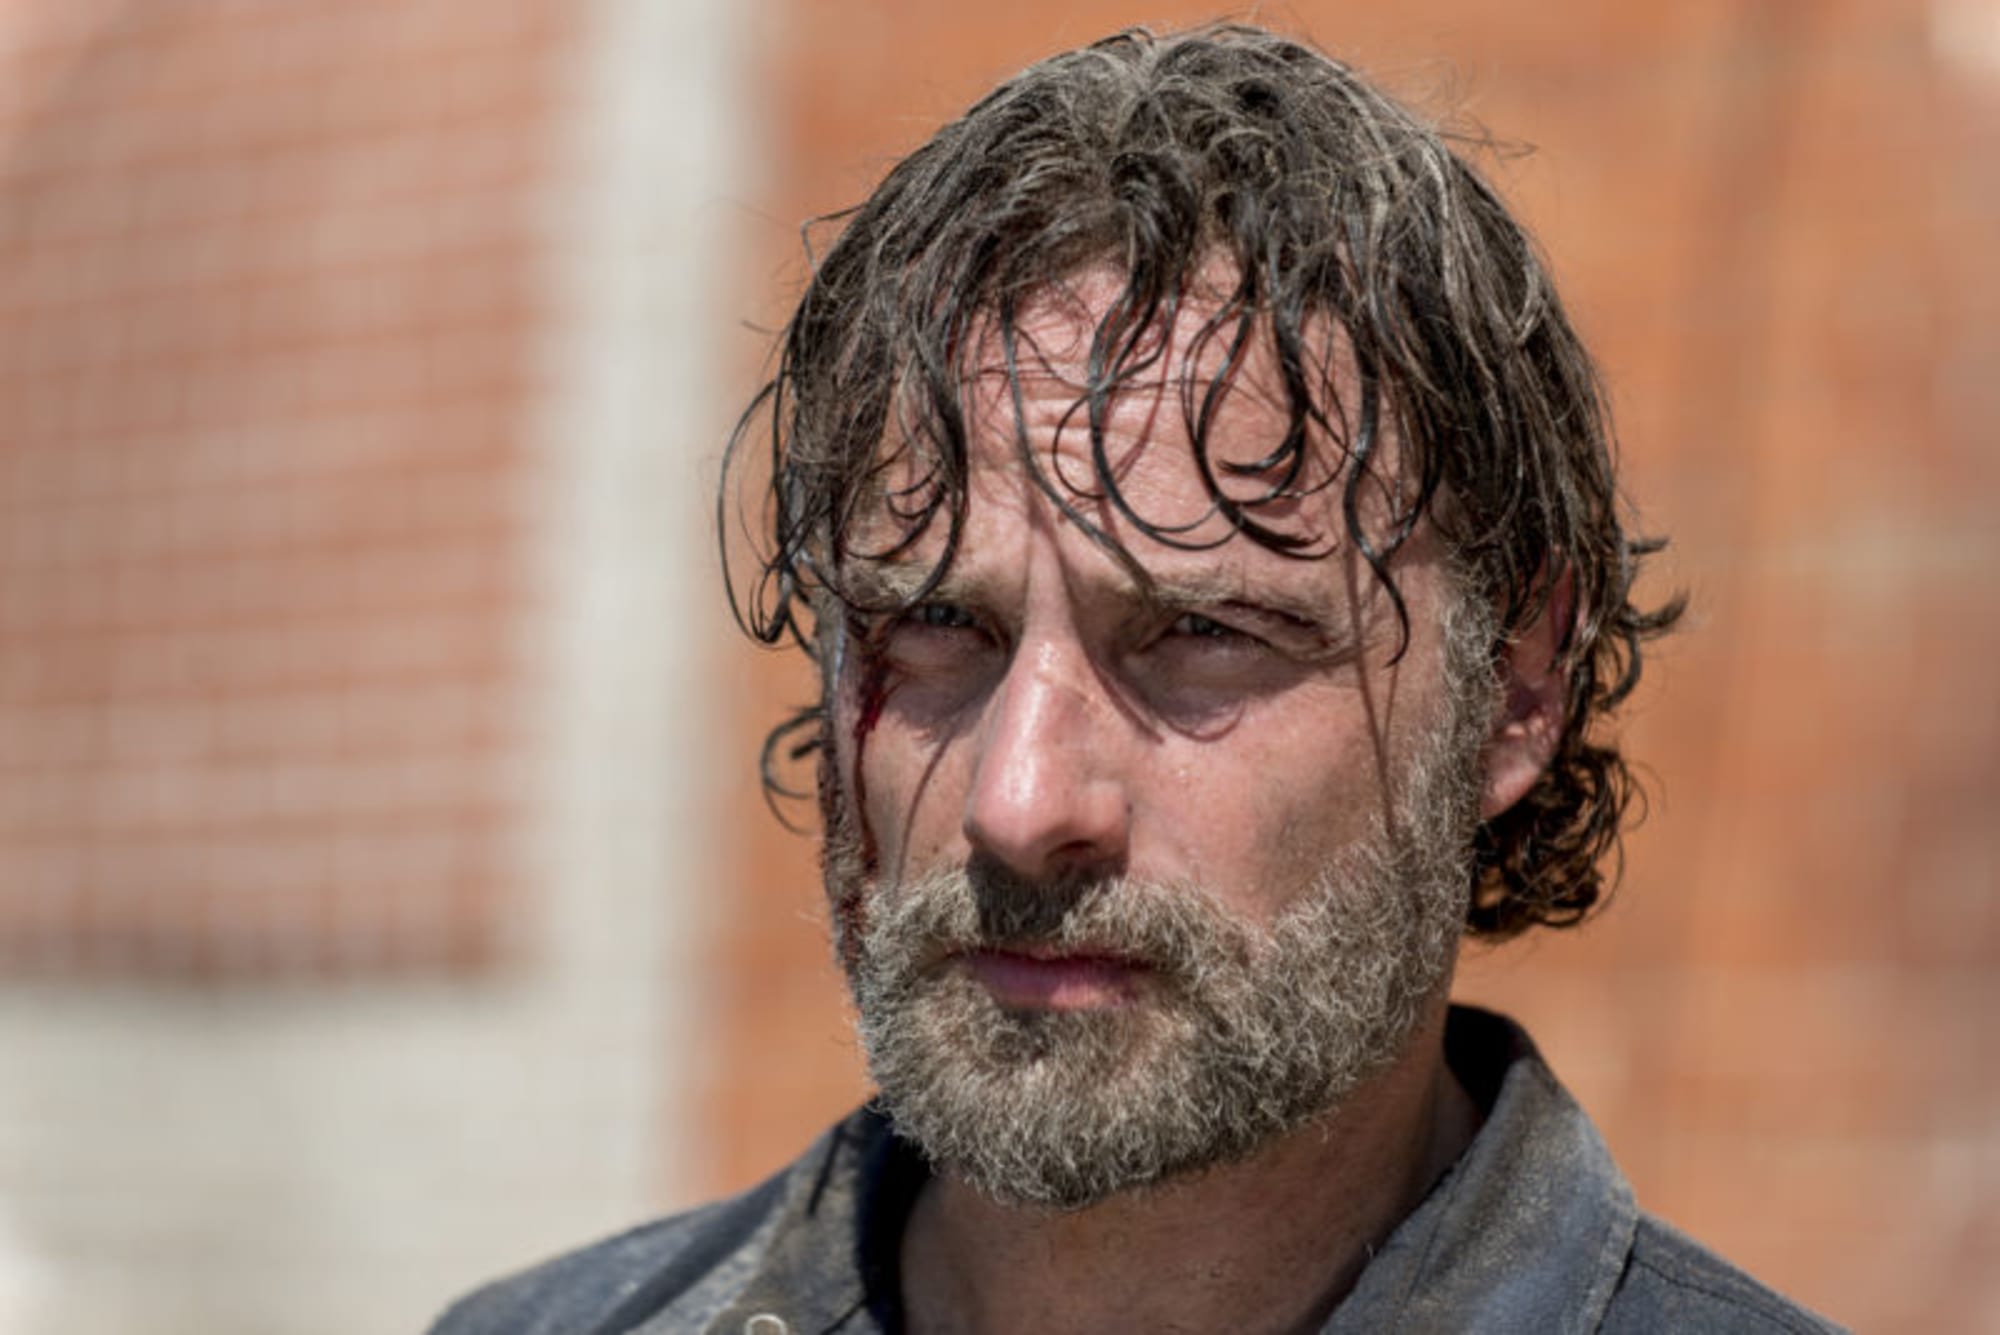 Rick Might be Turning Heel in the Michonne Spinoff